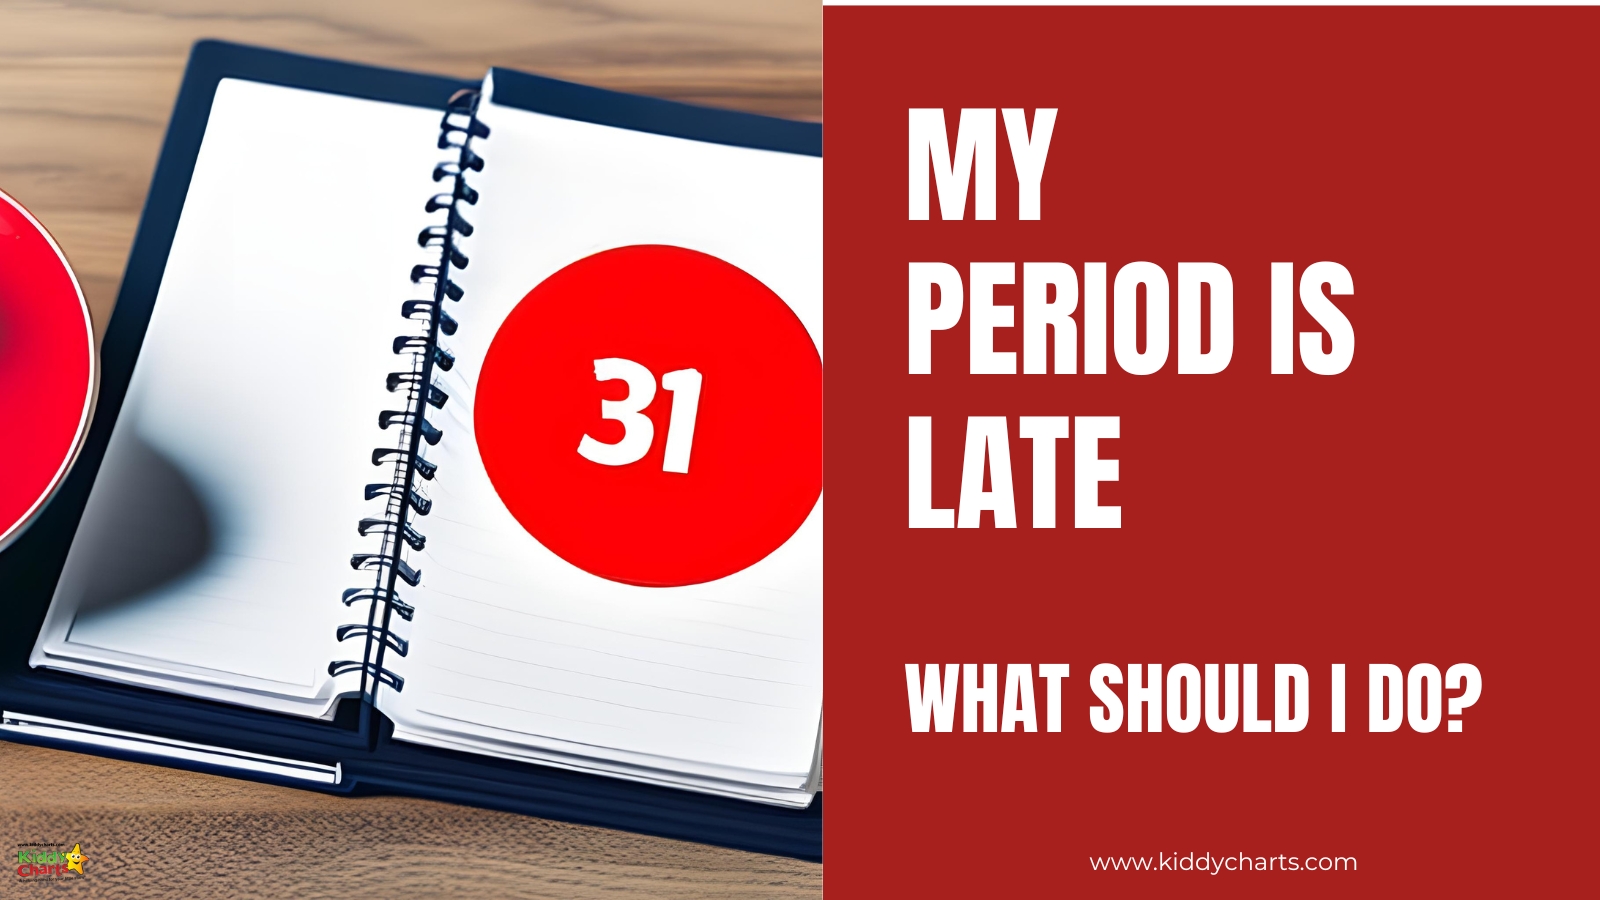 My period is late. What should I do?